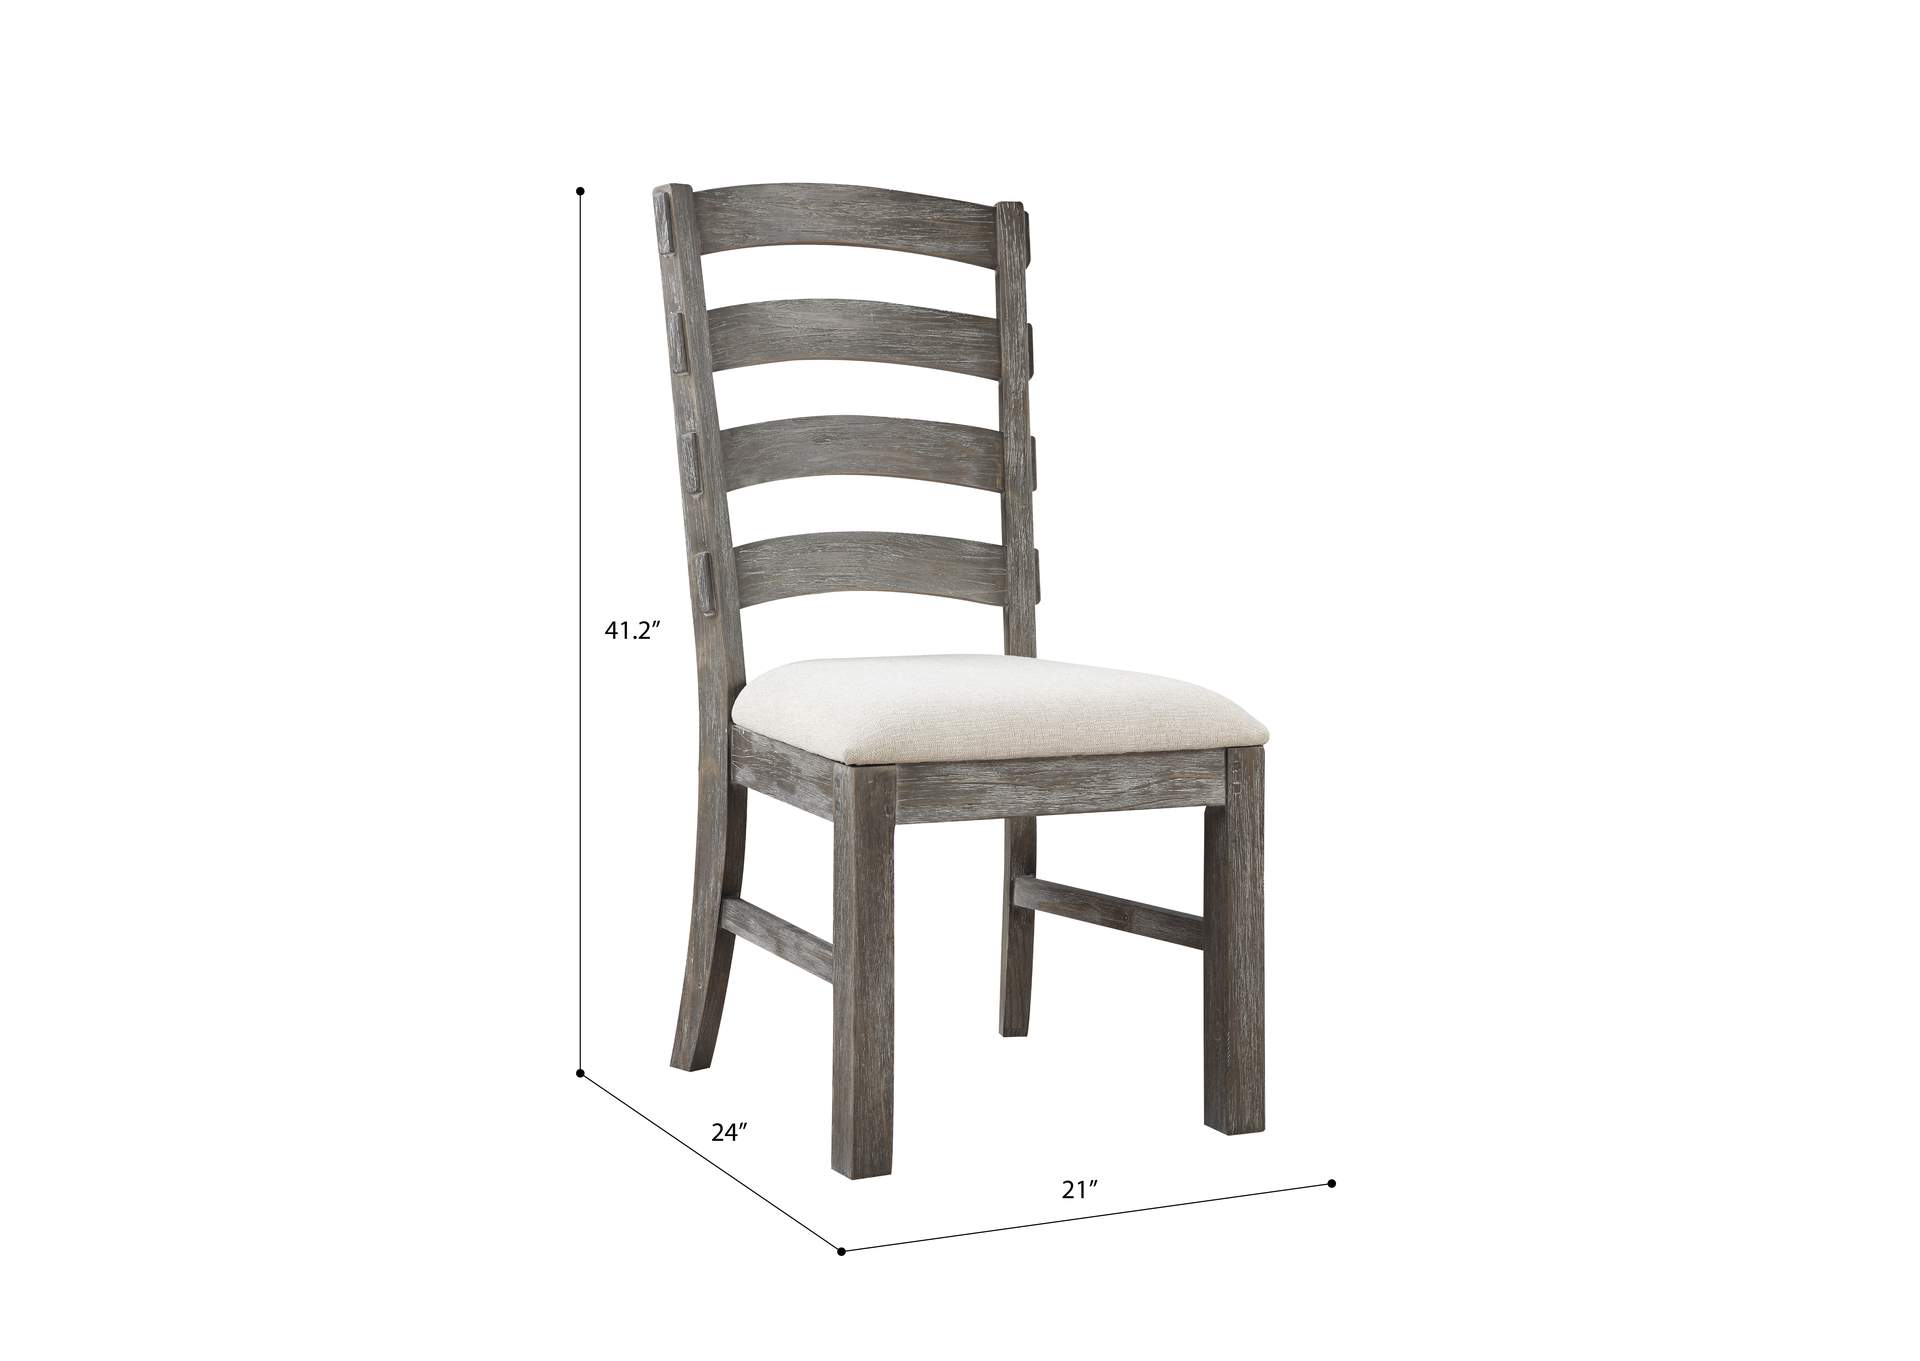 Paladin Upholstered Dining Chair,Emerald Home Furnishings